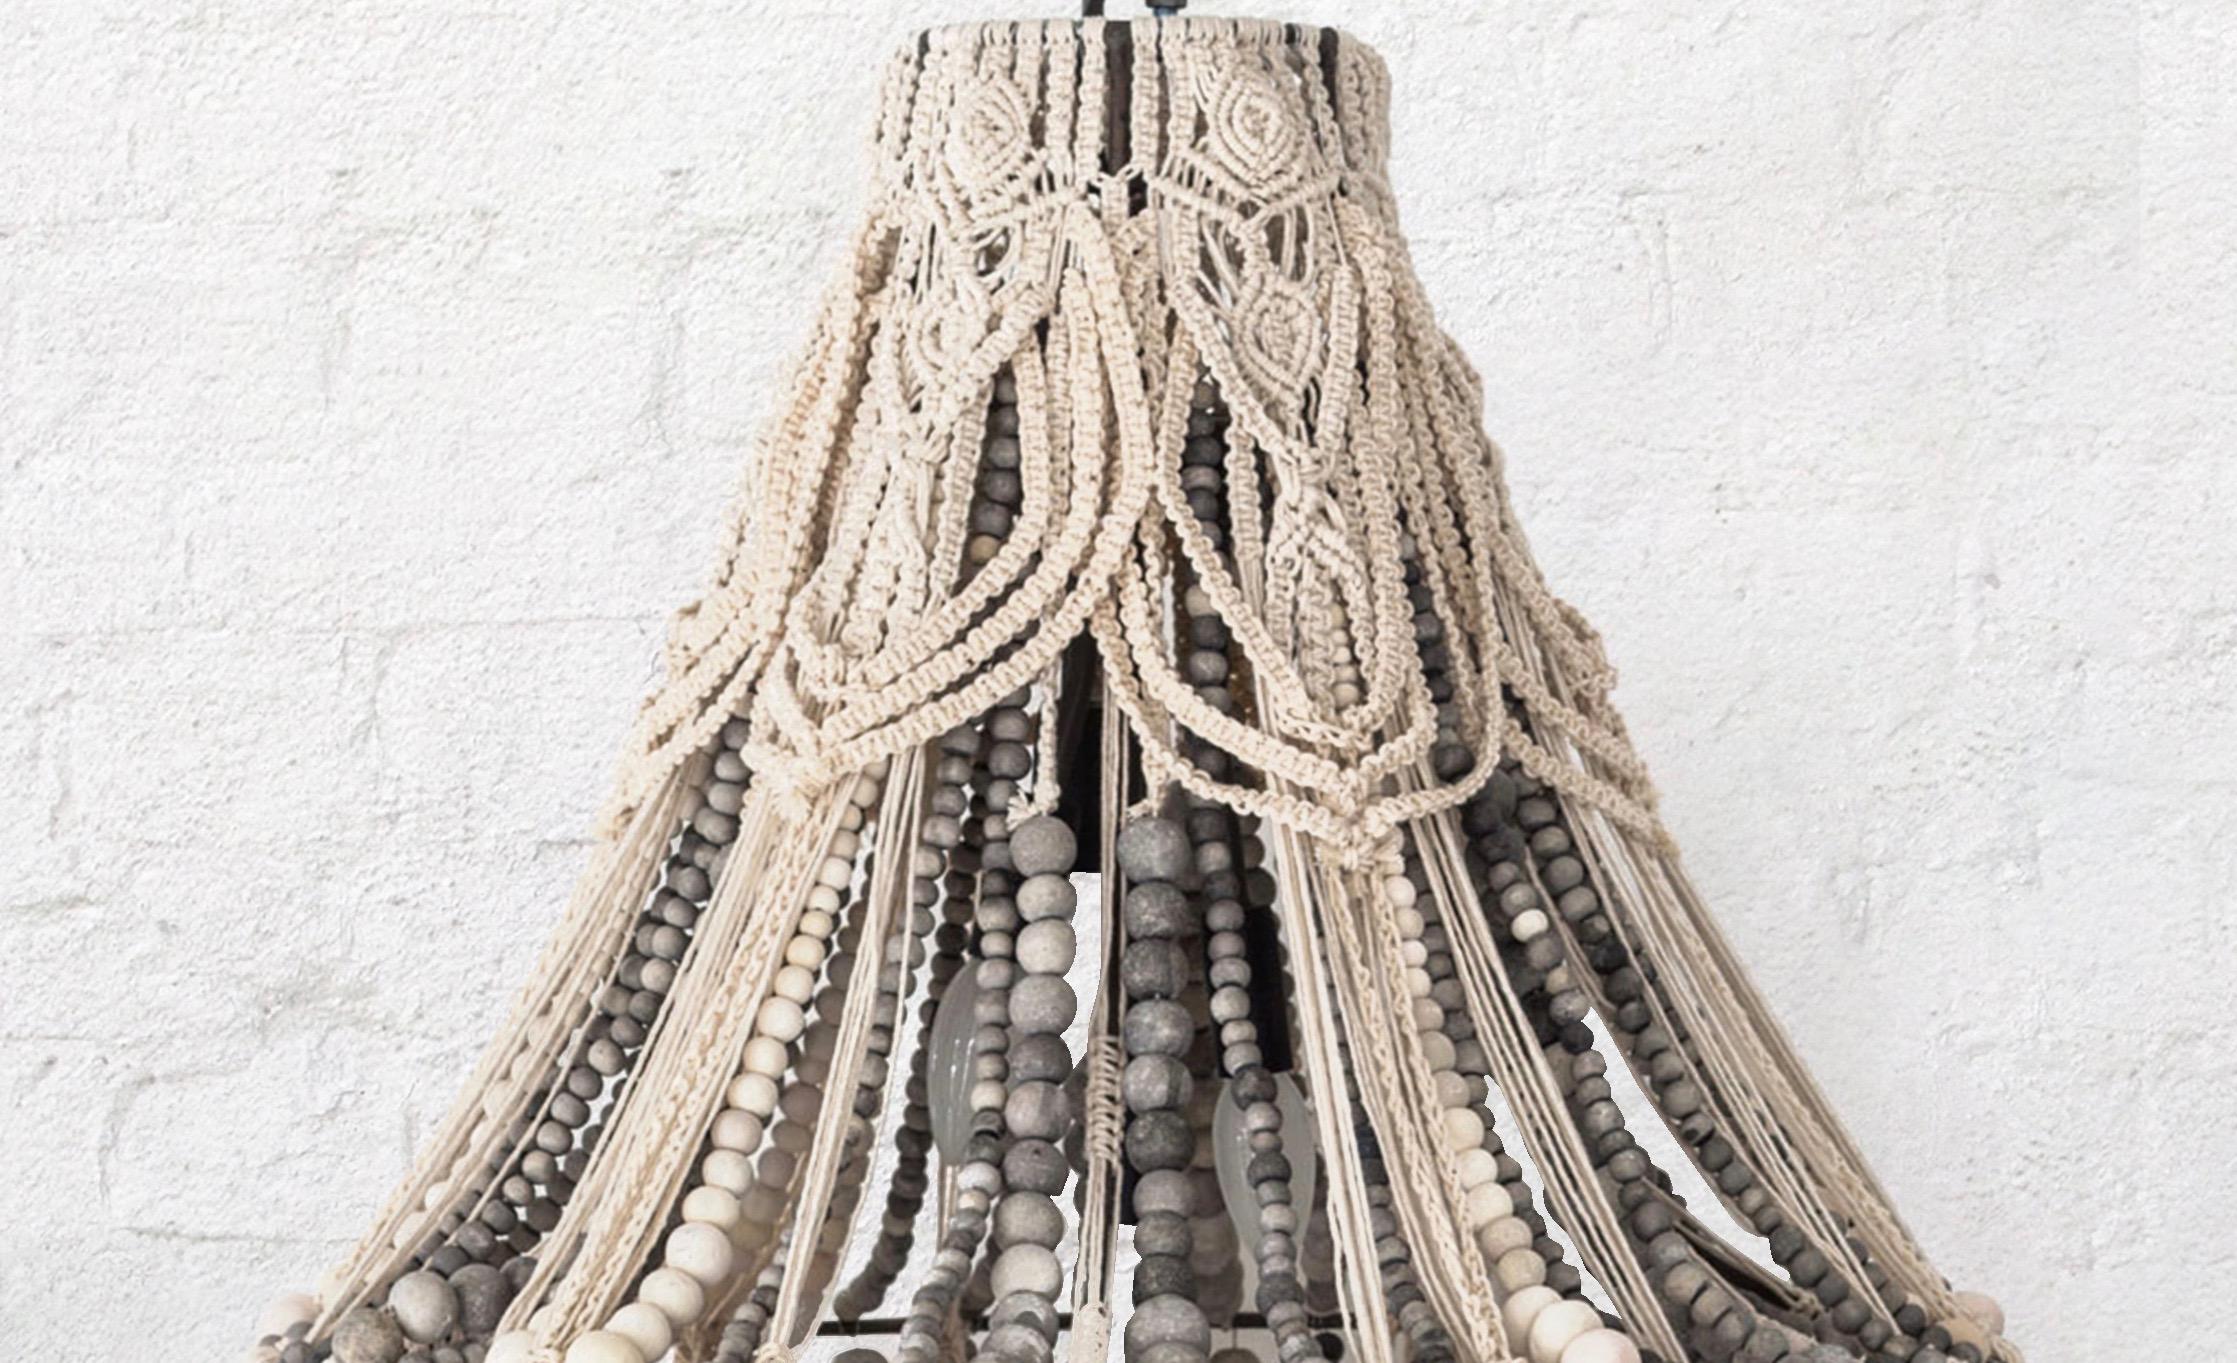 This one of a kind, utterly unique and magnificent macramé clay bead chandelier is collaboration between klaylife and Australian artisan Elena from three Queens Interiors.

Elena’s signature, intricate and creamy macramé work has been interwoven